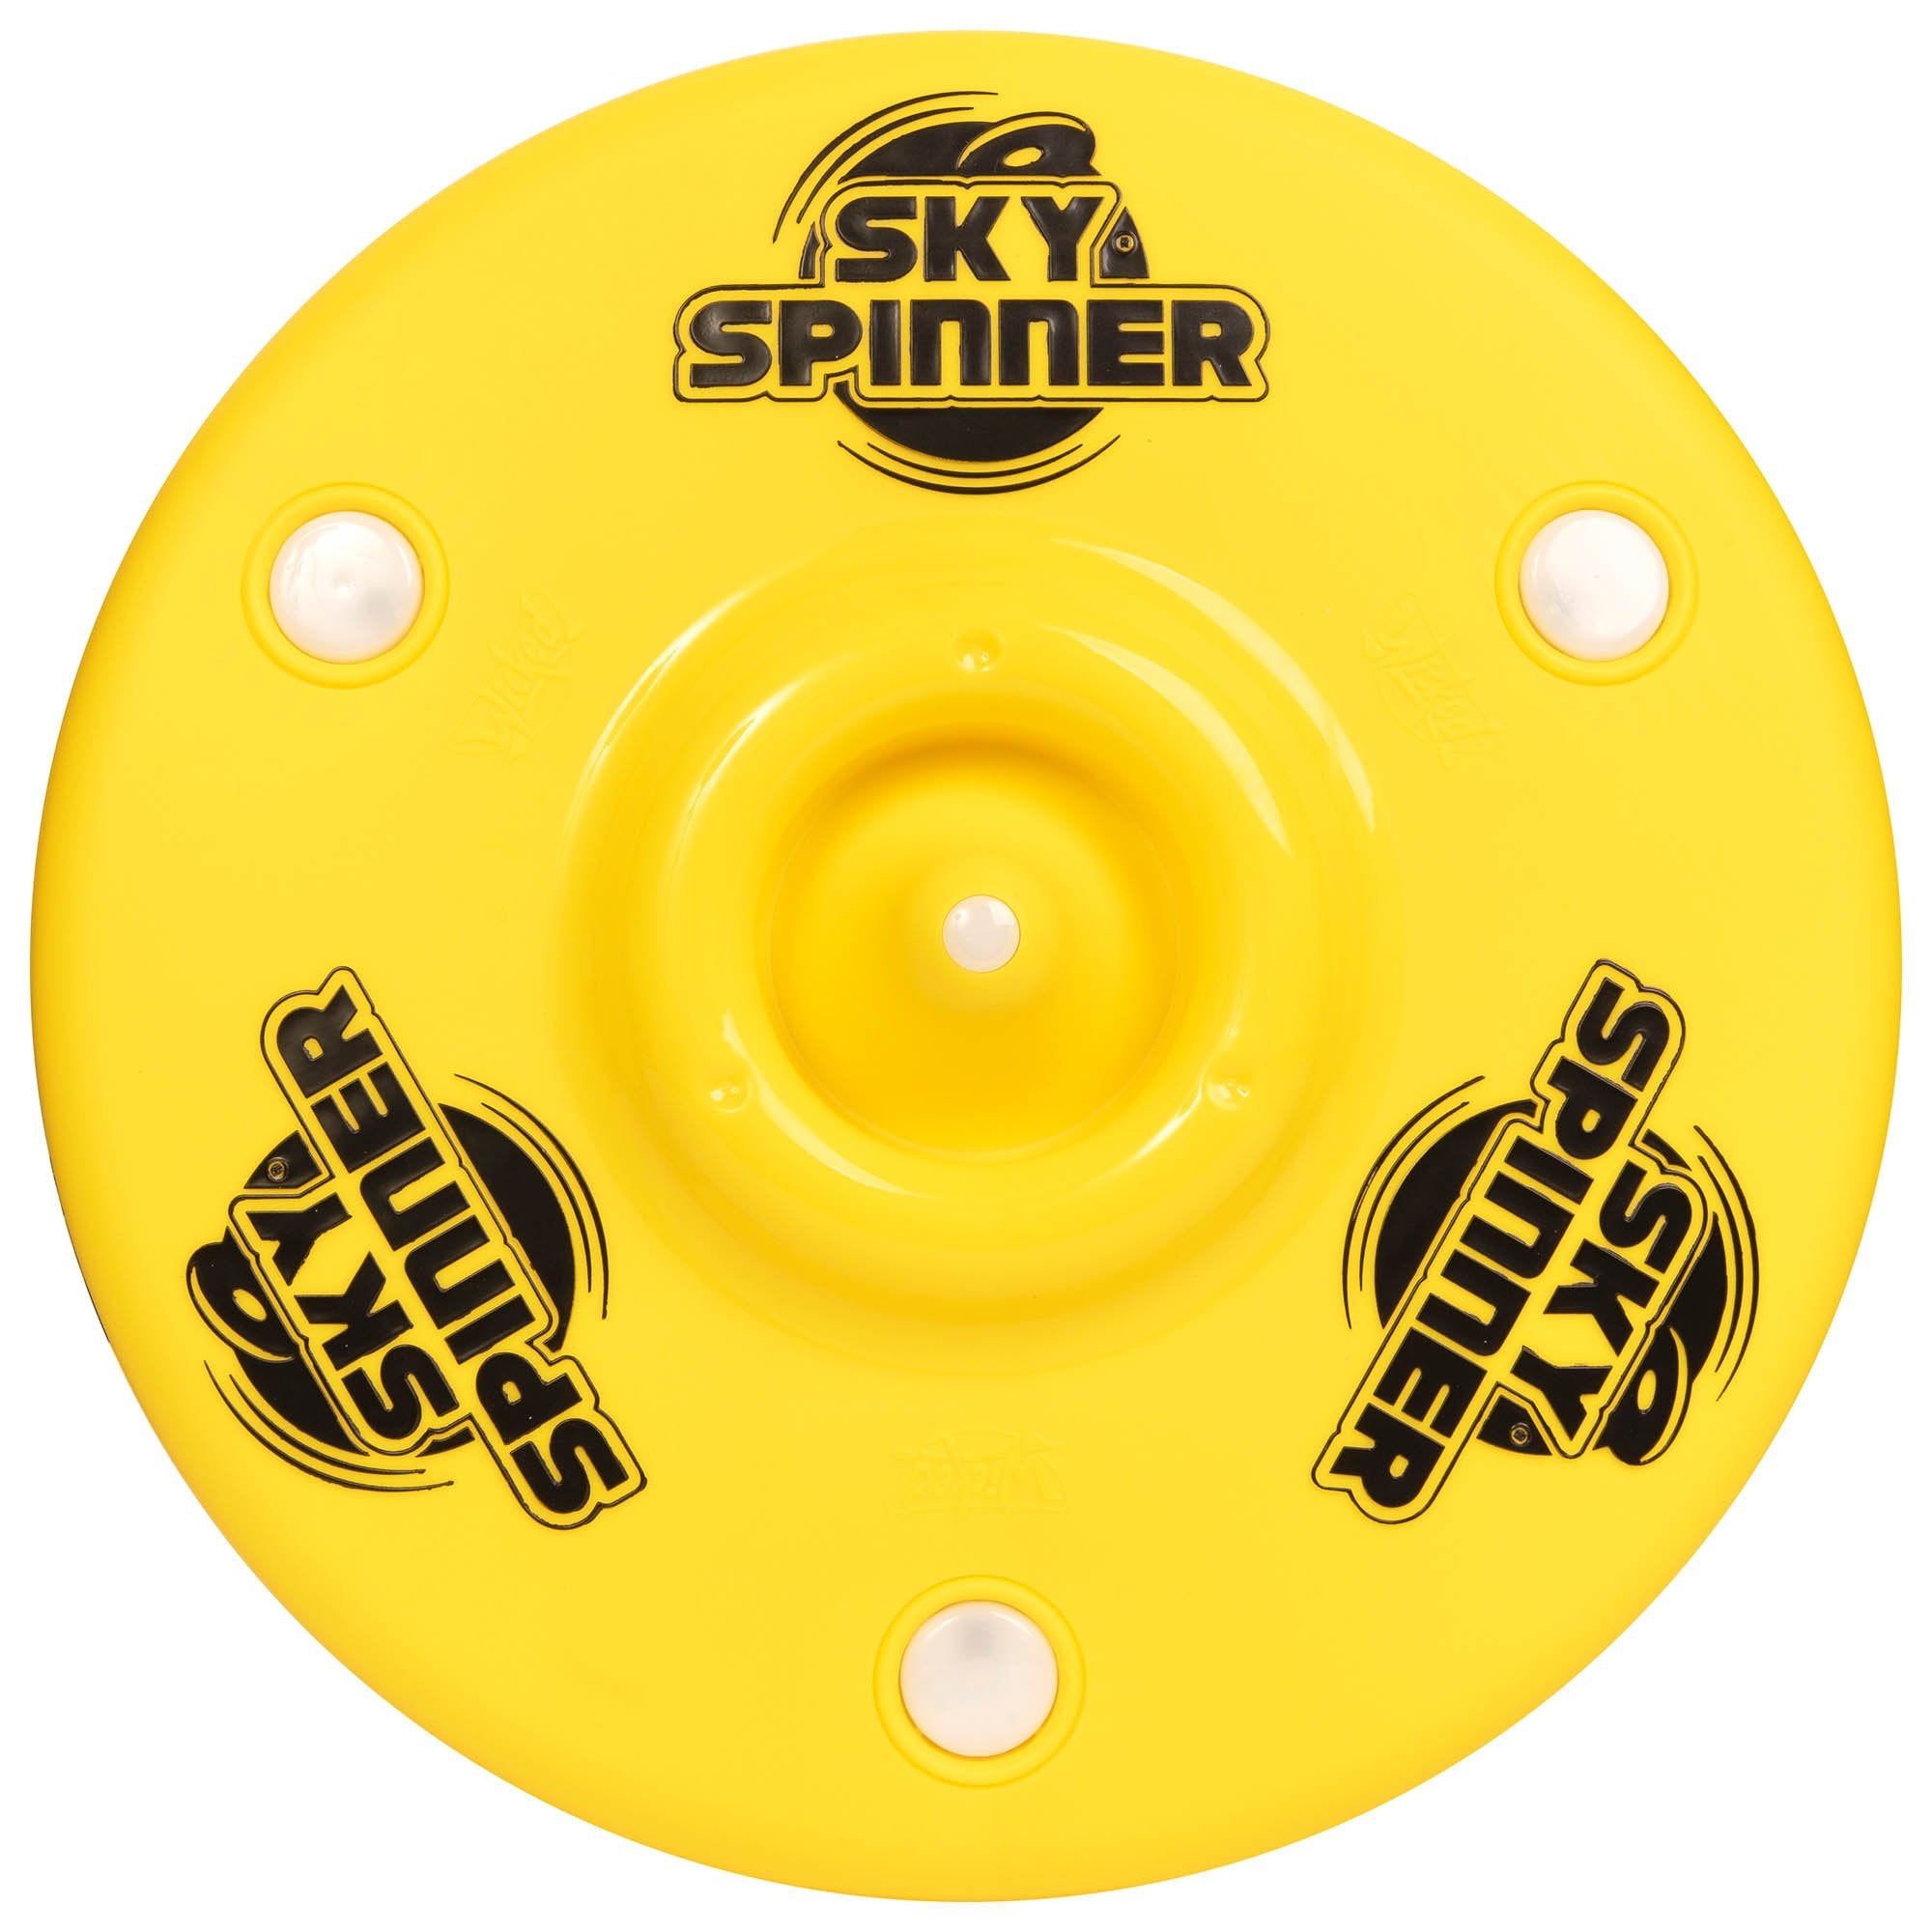 Wicked Sky Spinner Ultra LED Trick Disc from Sweatband.com